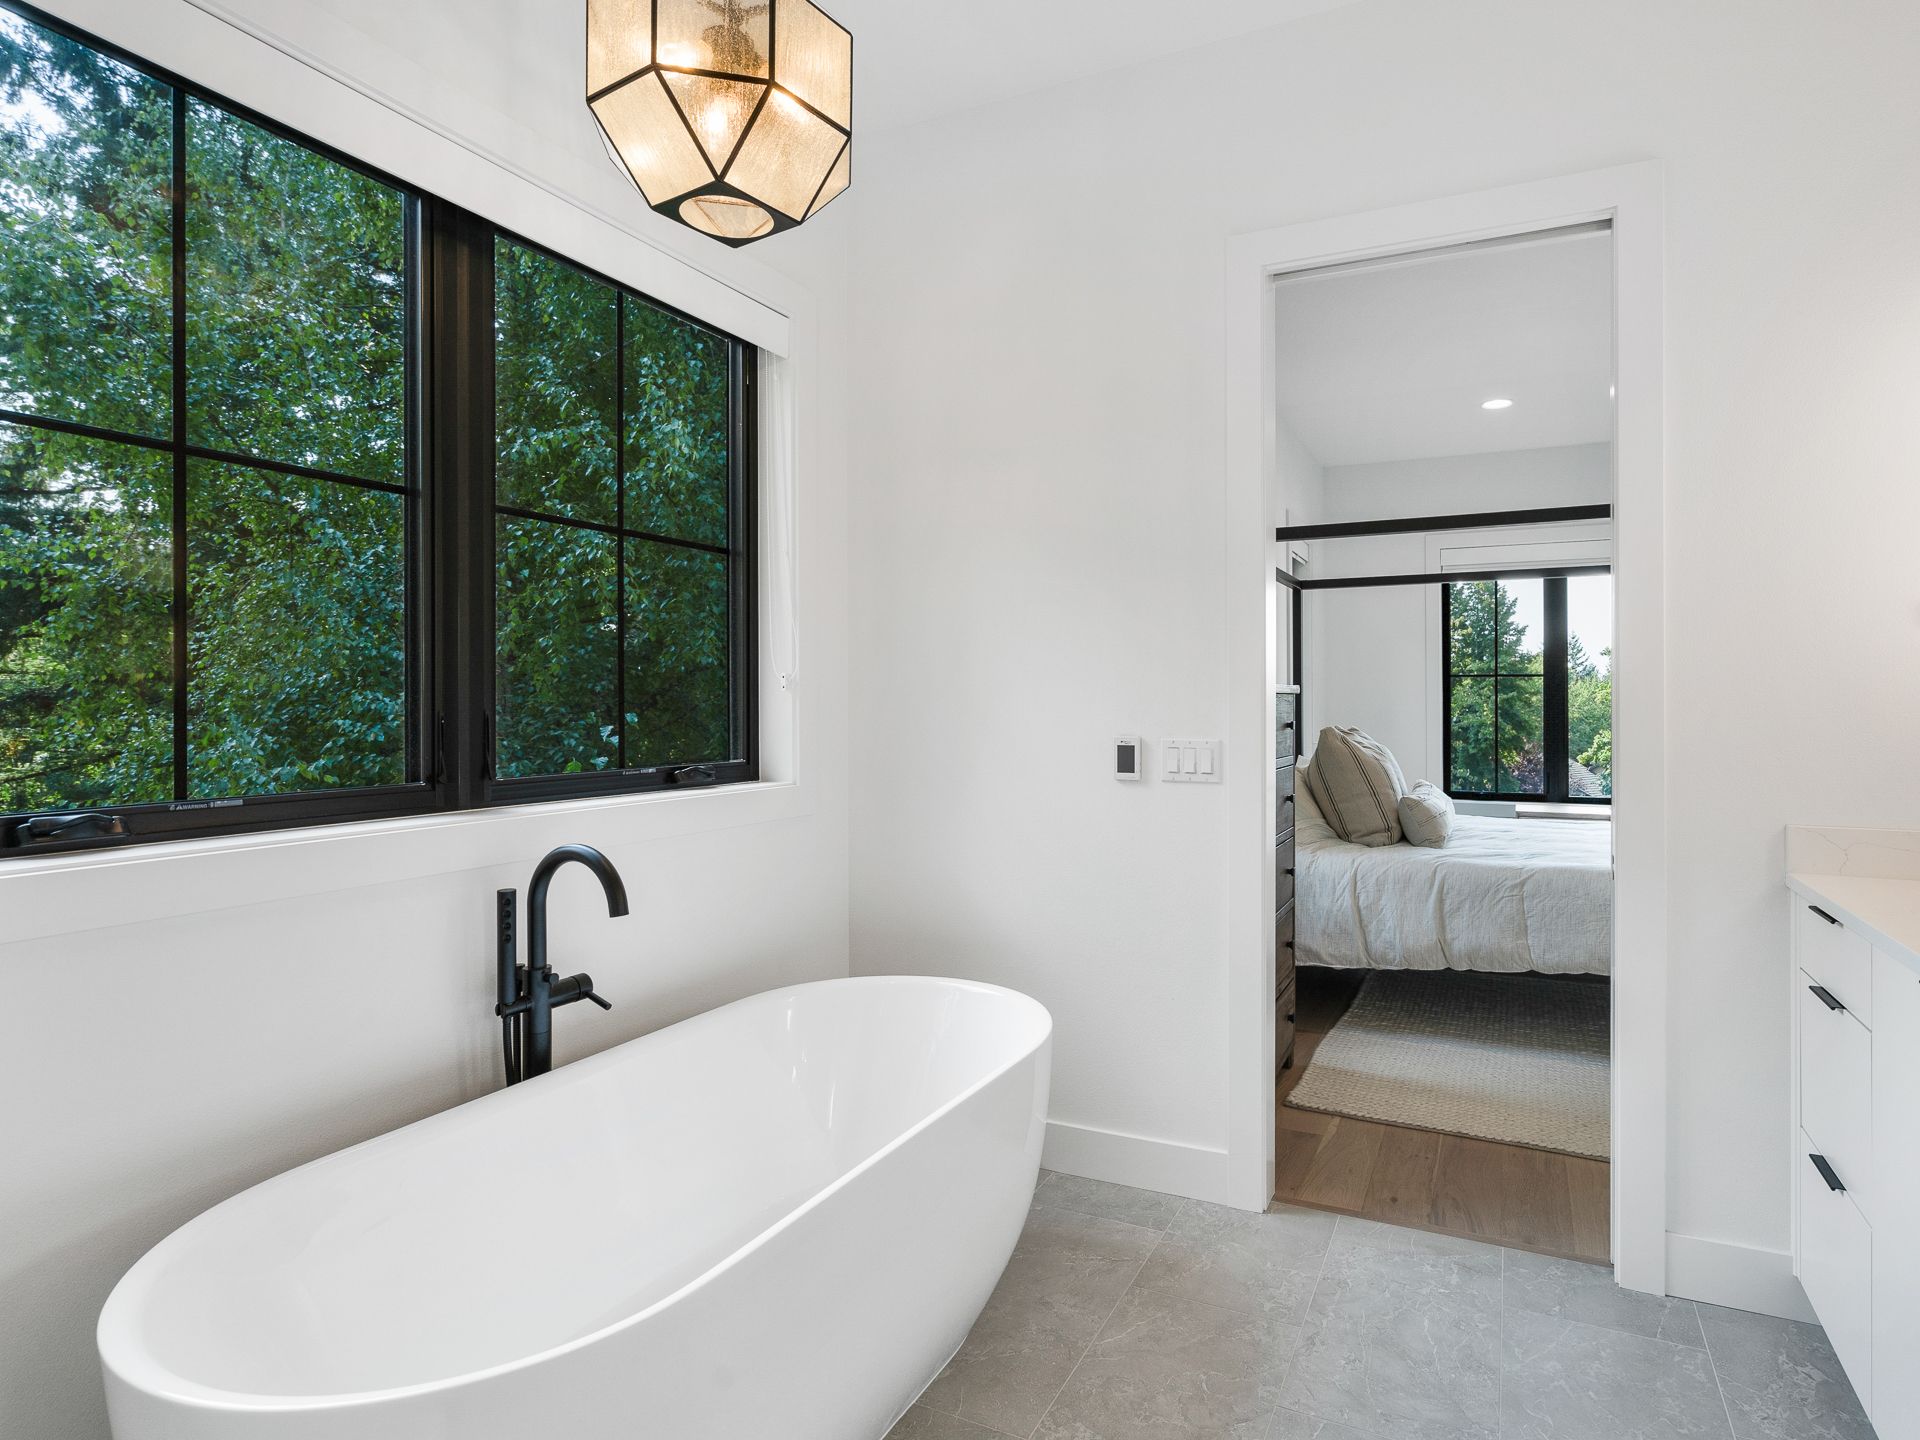 Photo of a bathroom with full size shower and freestanding tub.